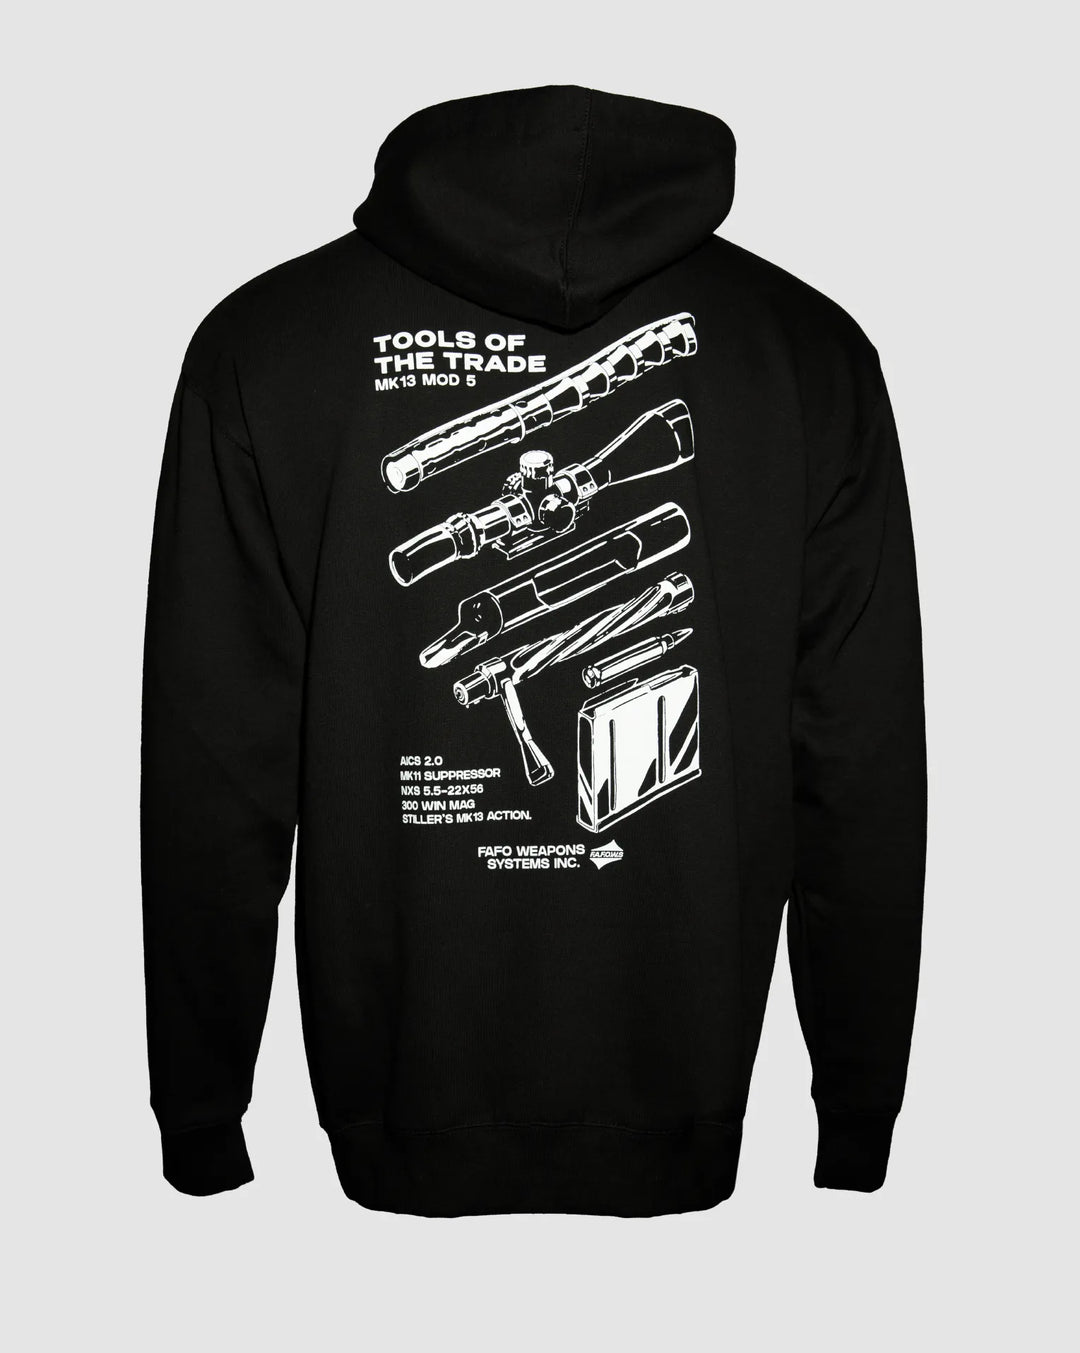 FAFO Weapon Systems Hoodie